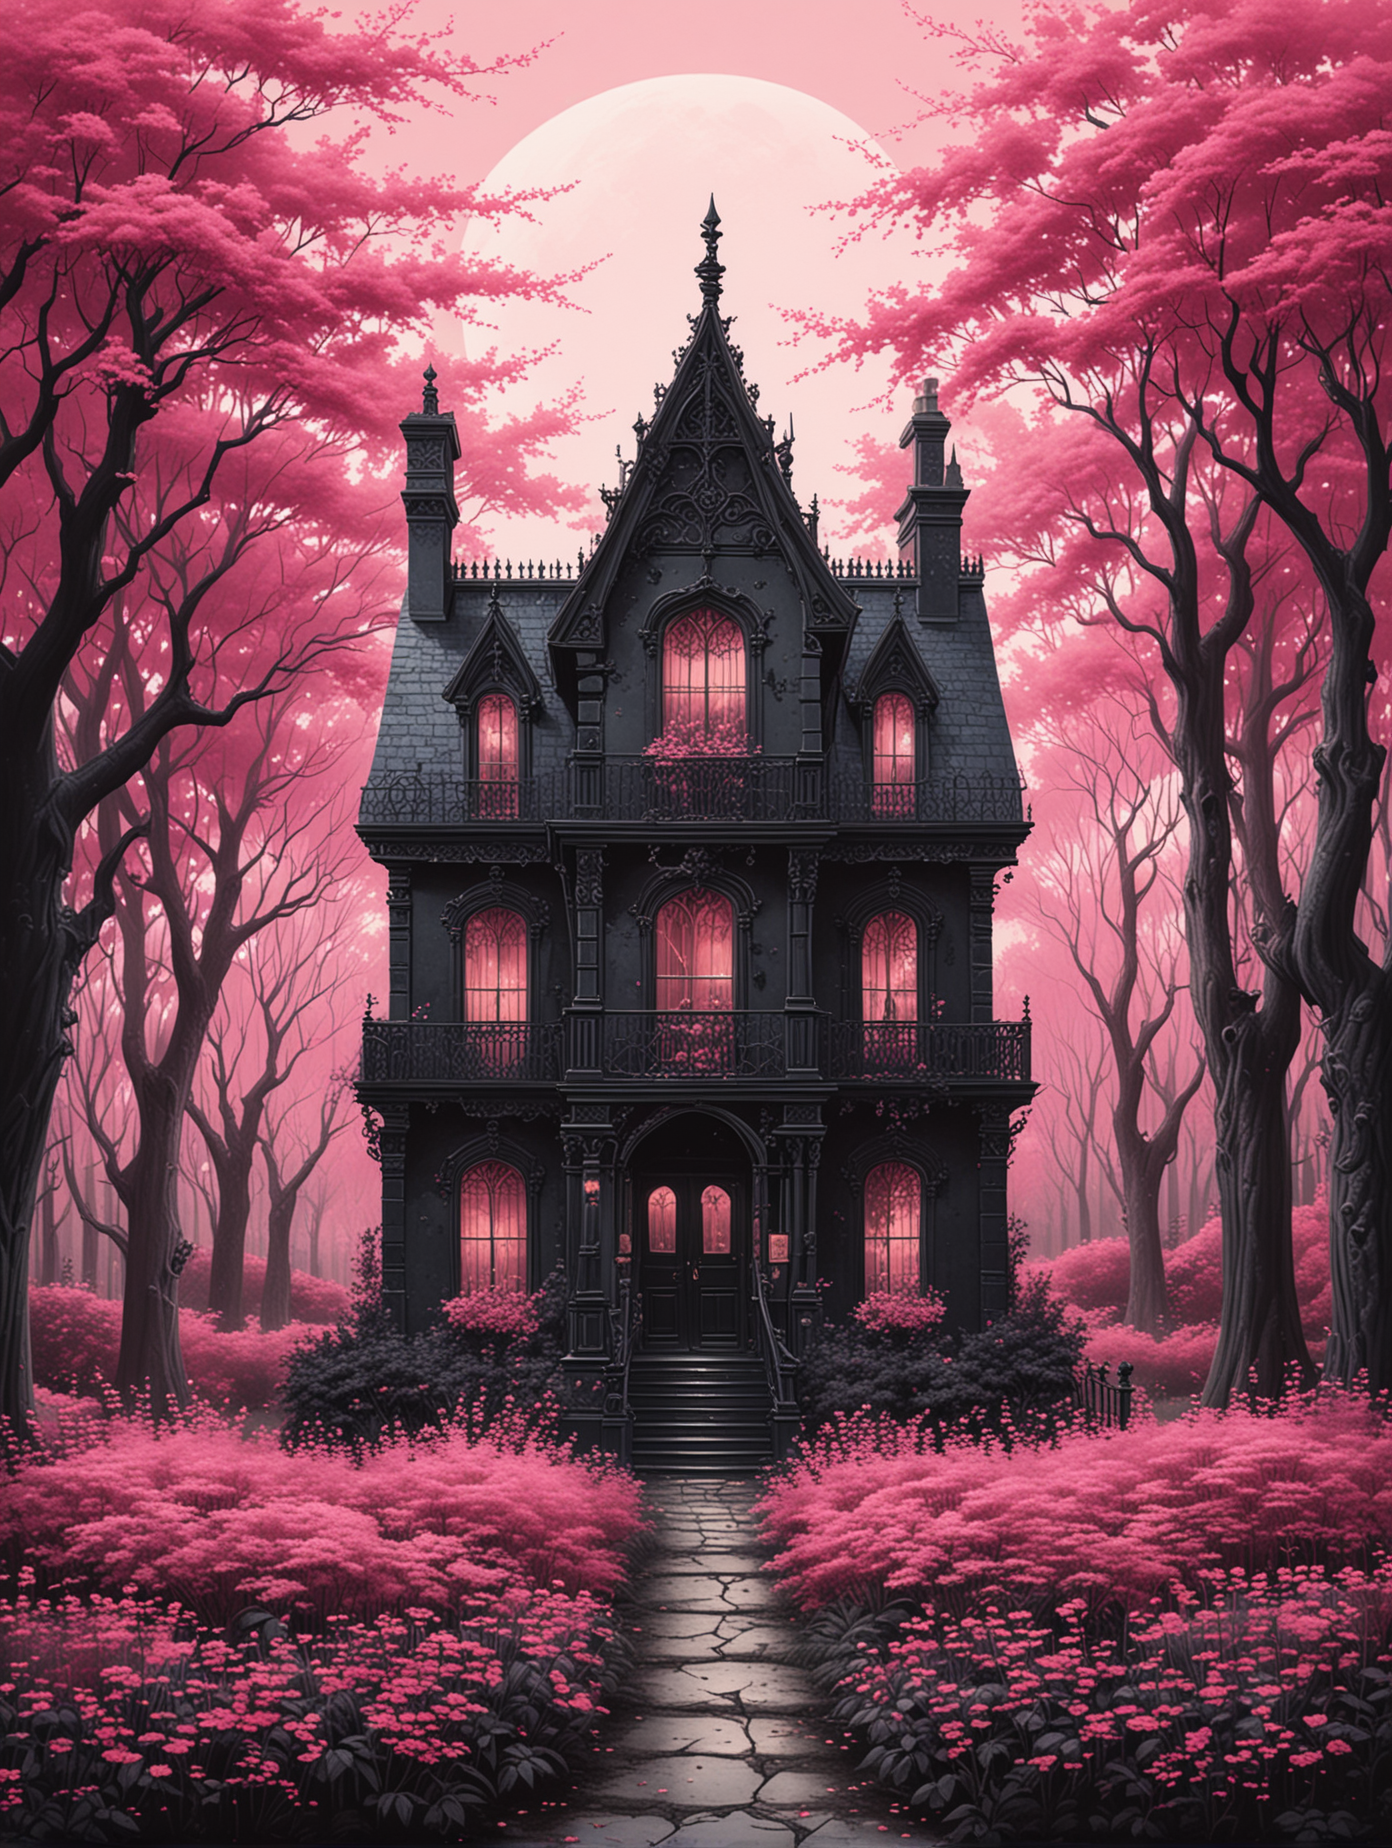 Illustration of a black gothic house, surrounded by trees with pink bushes